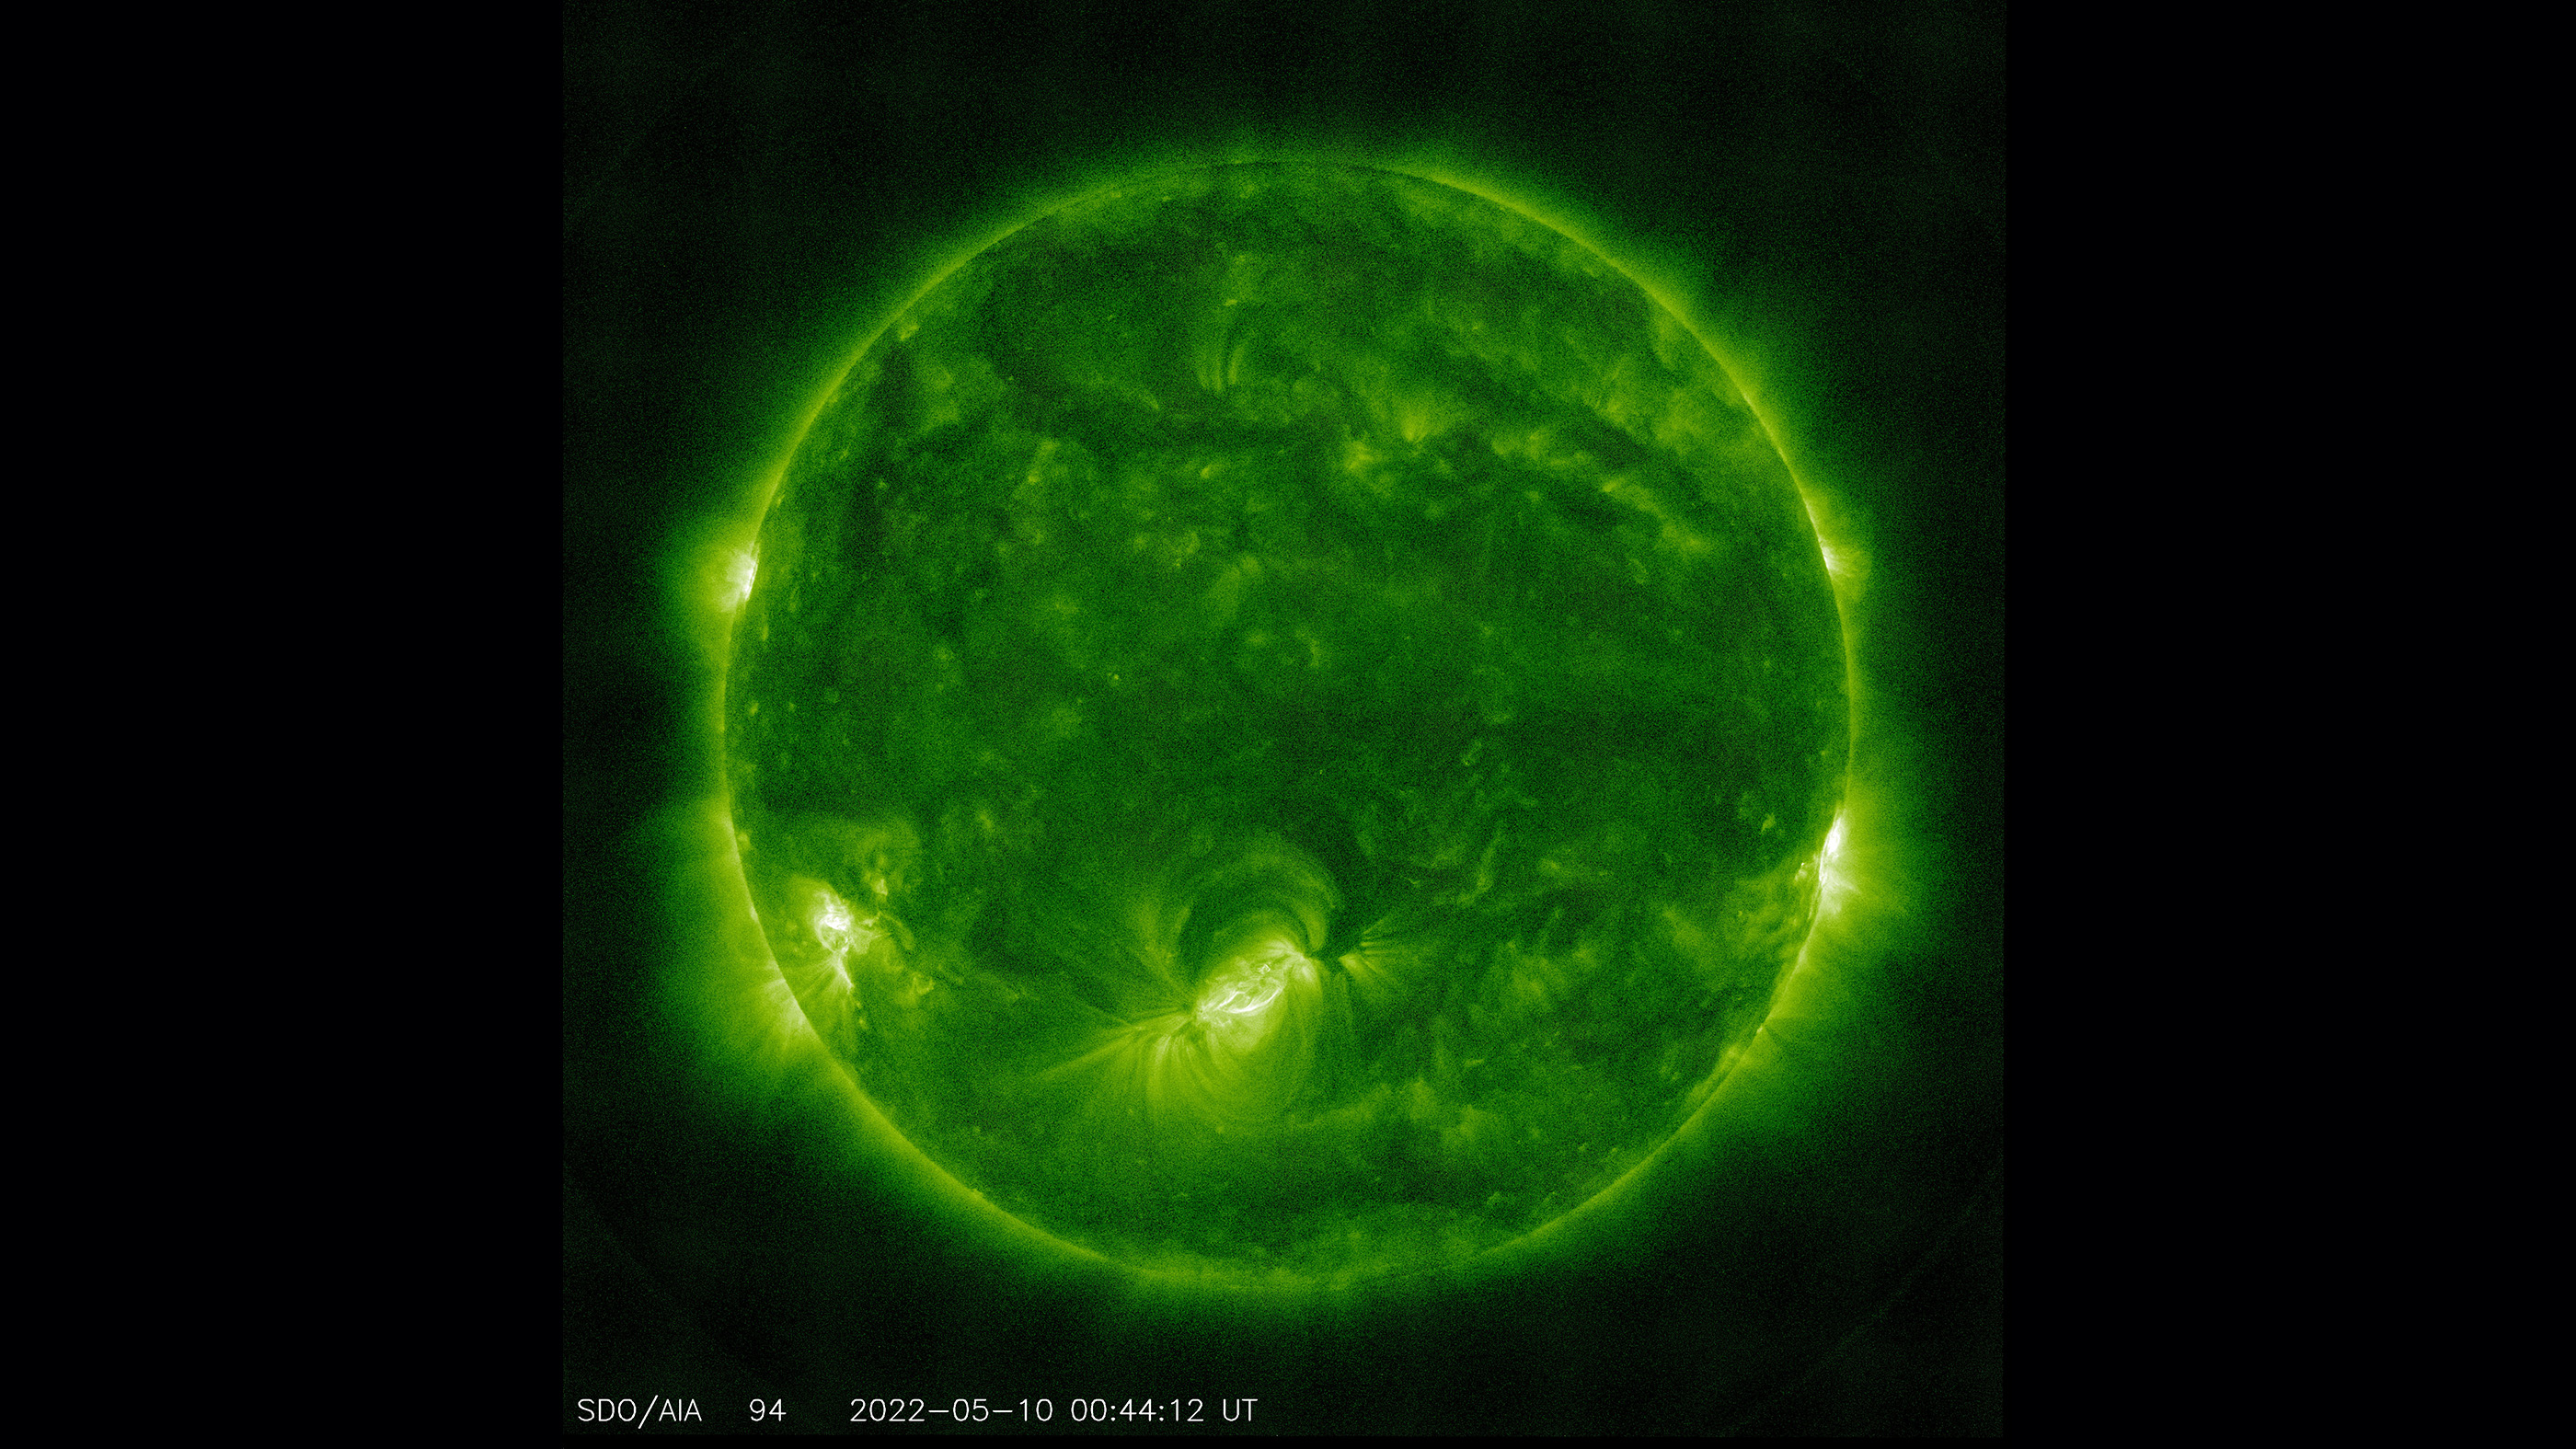 Shortly before 9 a.m. in New York on Tuesday, when the Solar Dynamics Observatory took this photograph of the sun at a wavelength of 94 angstroms, sunspot region AR3006 (lower center) emitted a powerful solar flare, rated X1.5